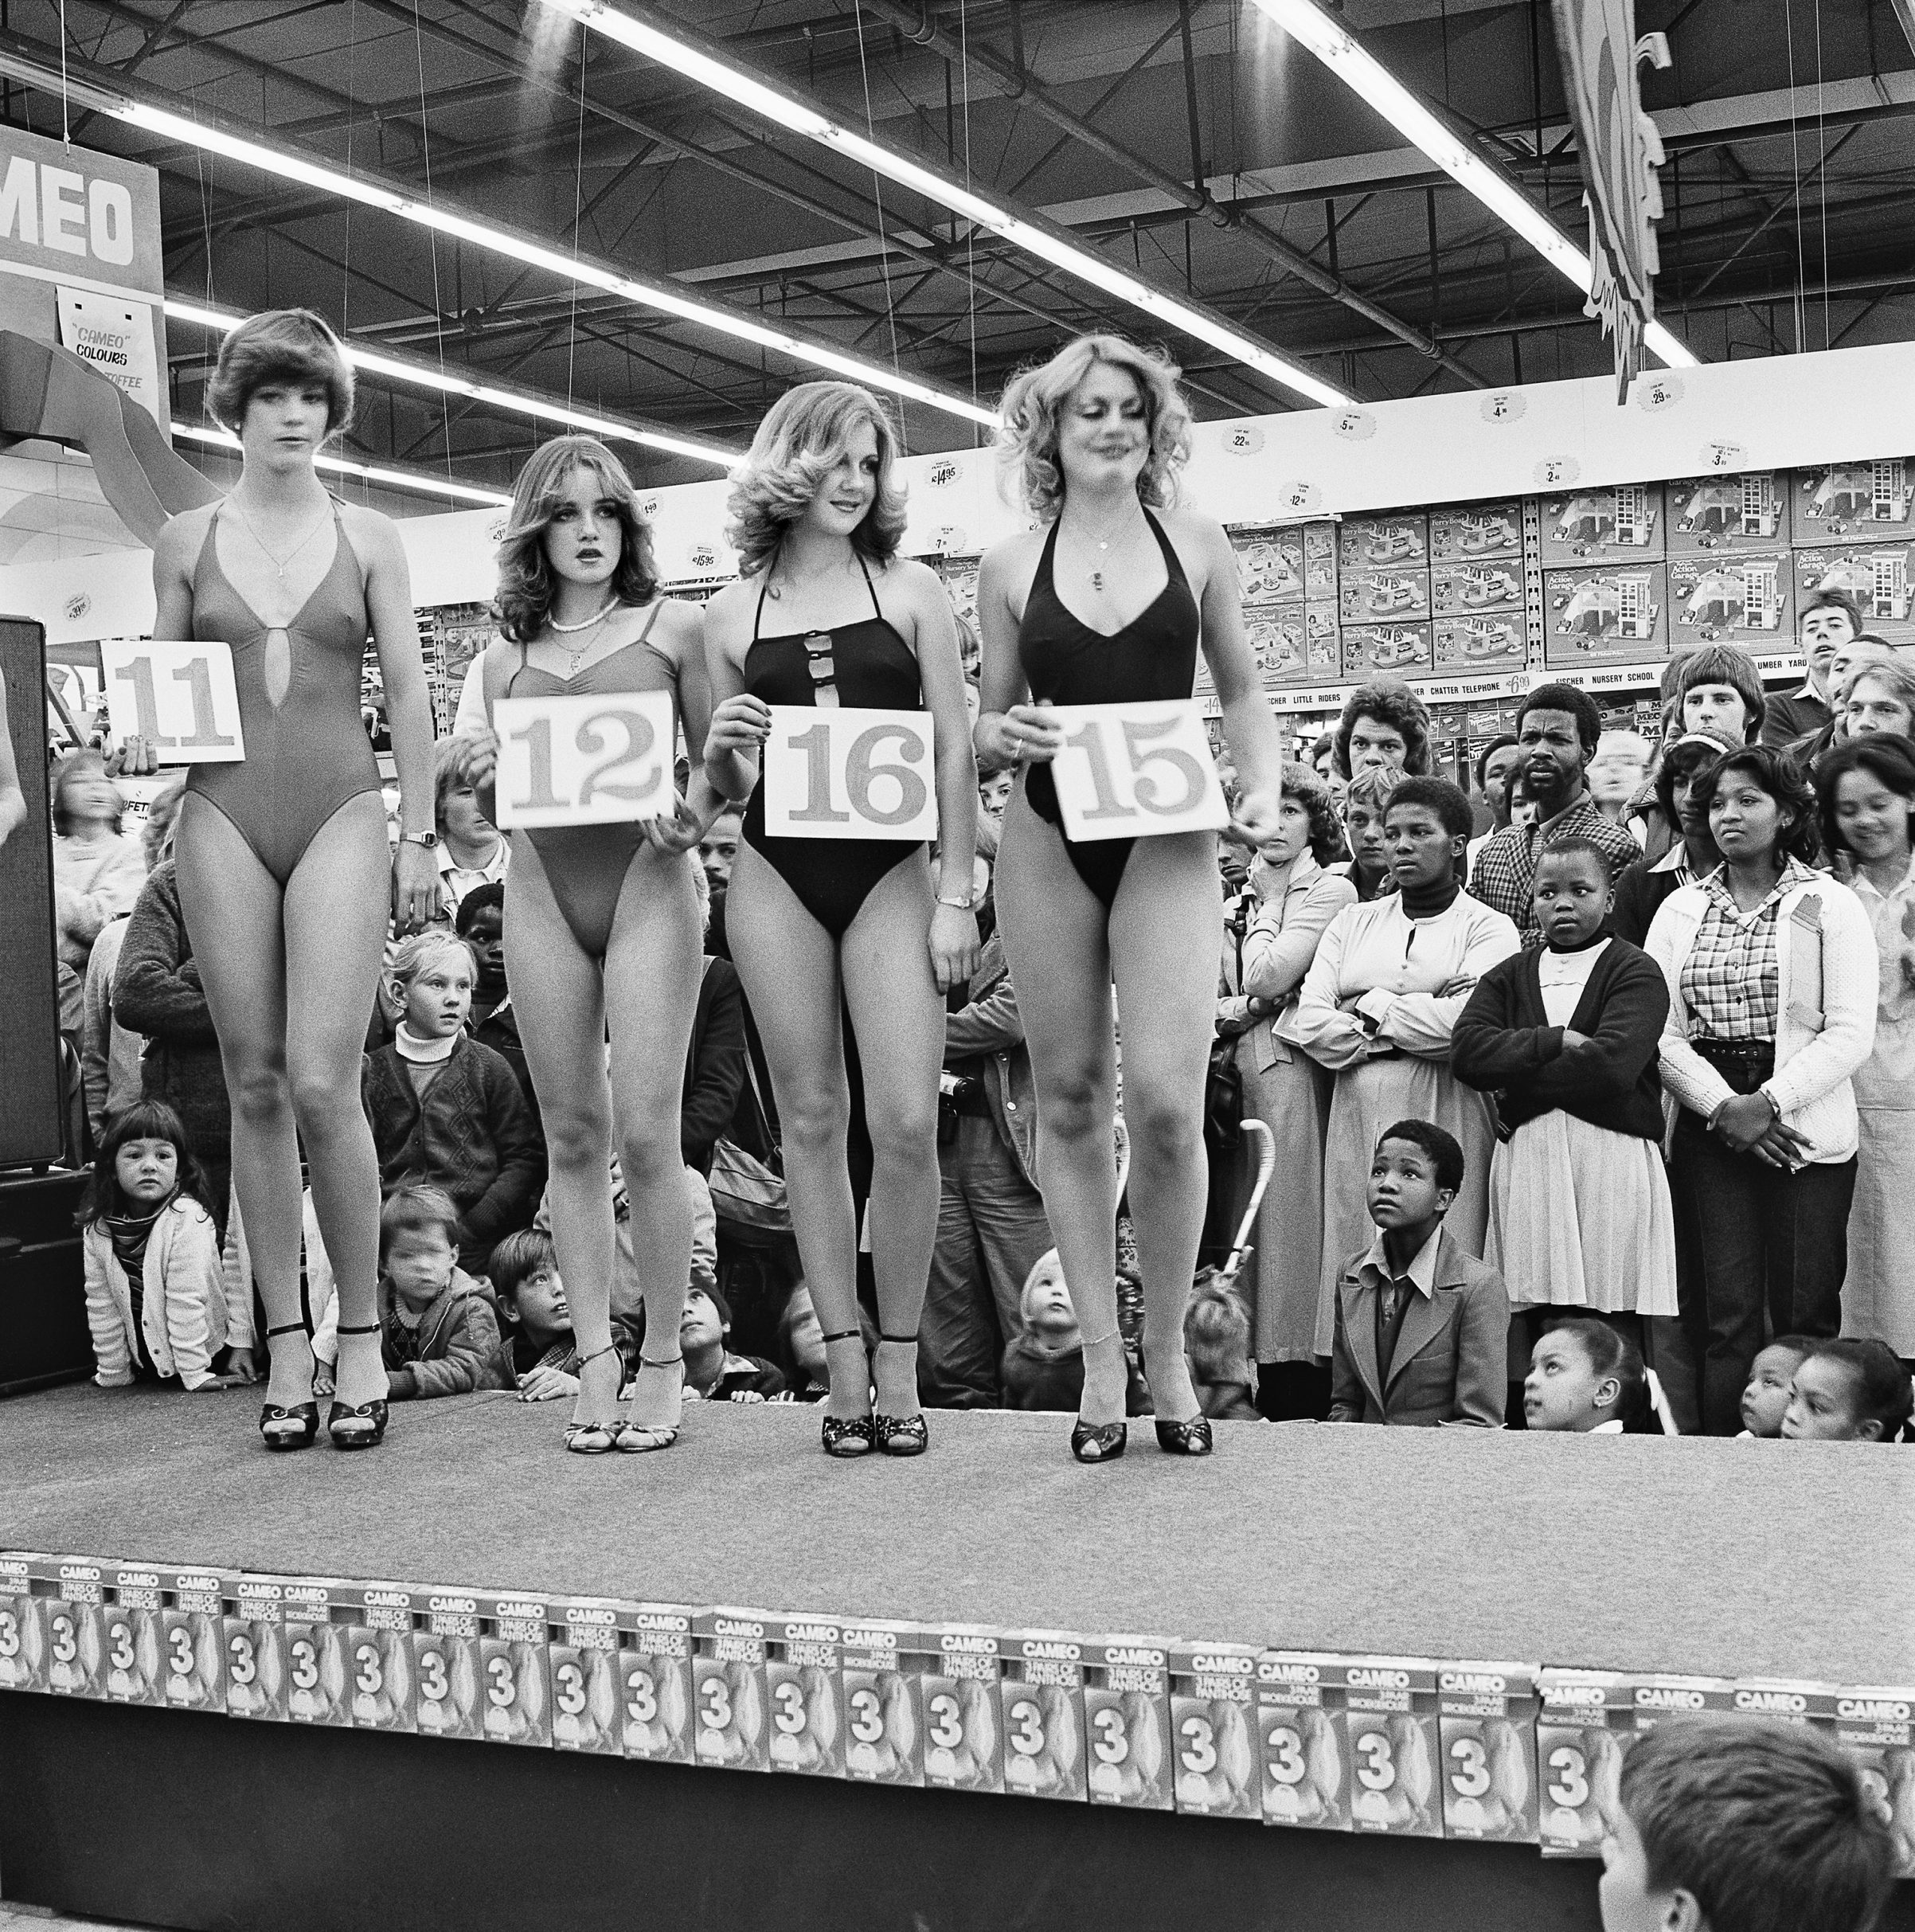 Saturday morning at the Hypermarket: Semi-final of the Miss Lovely Legs Competition. 28 June 1980 (David Goldblatt—Courtesy of the Goodman Gallery)